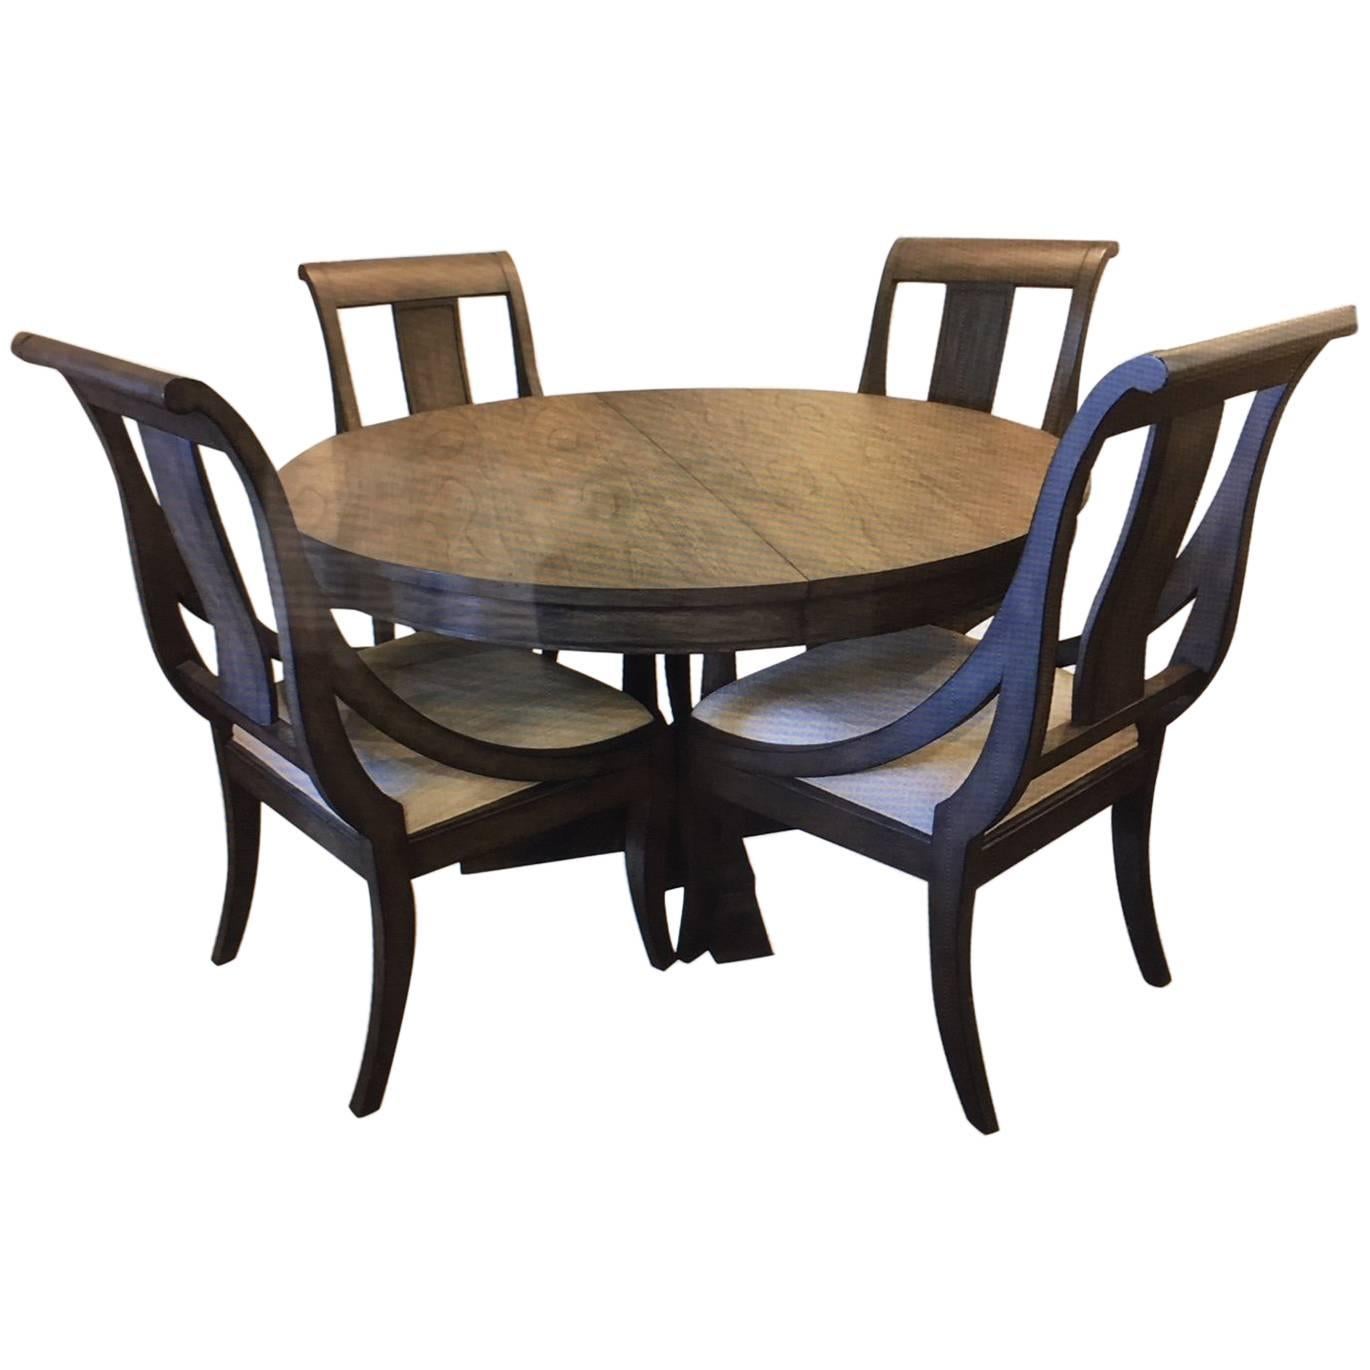 Grey Dining or Kitchen Table with Four Chairs by Hekman